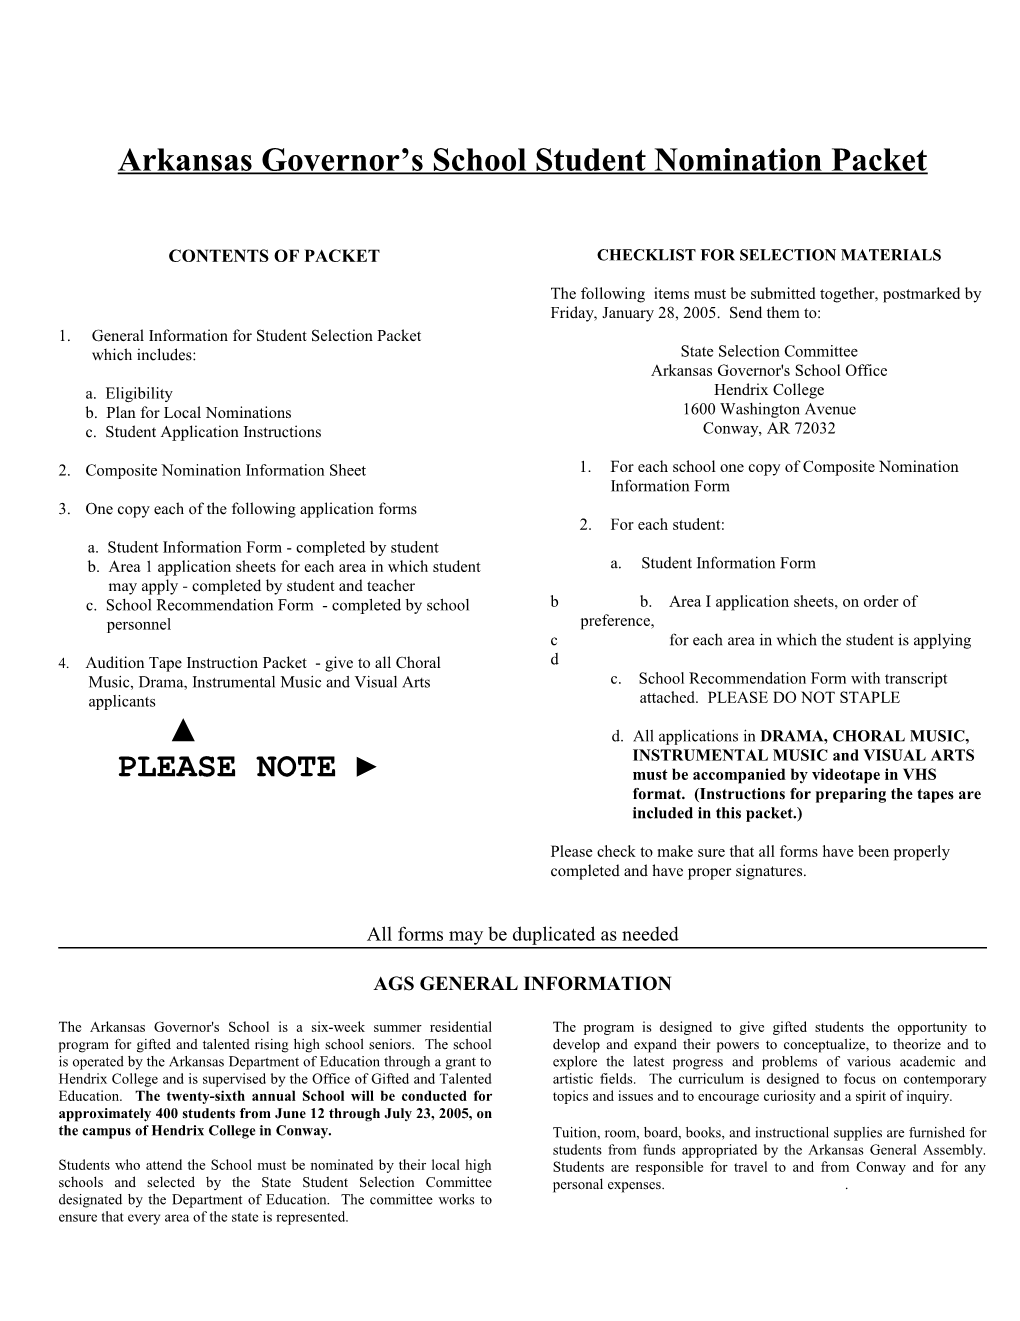 Arkansas Governor's School: Audition Tape Instructions